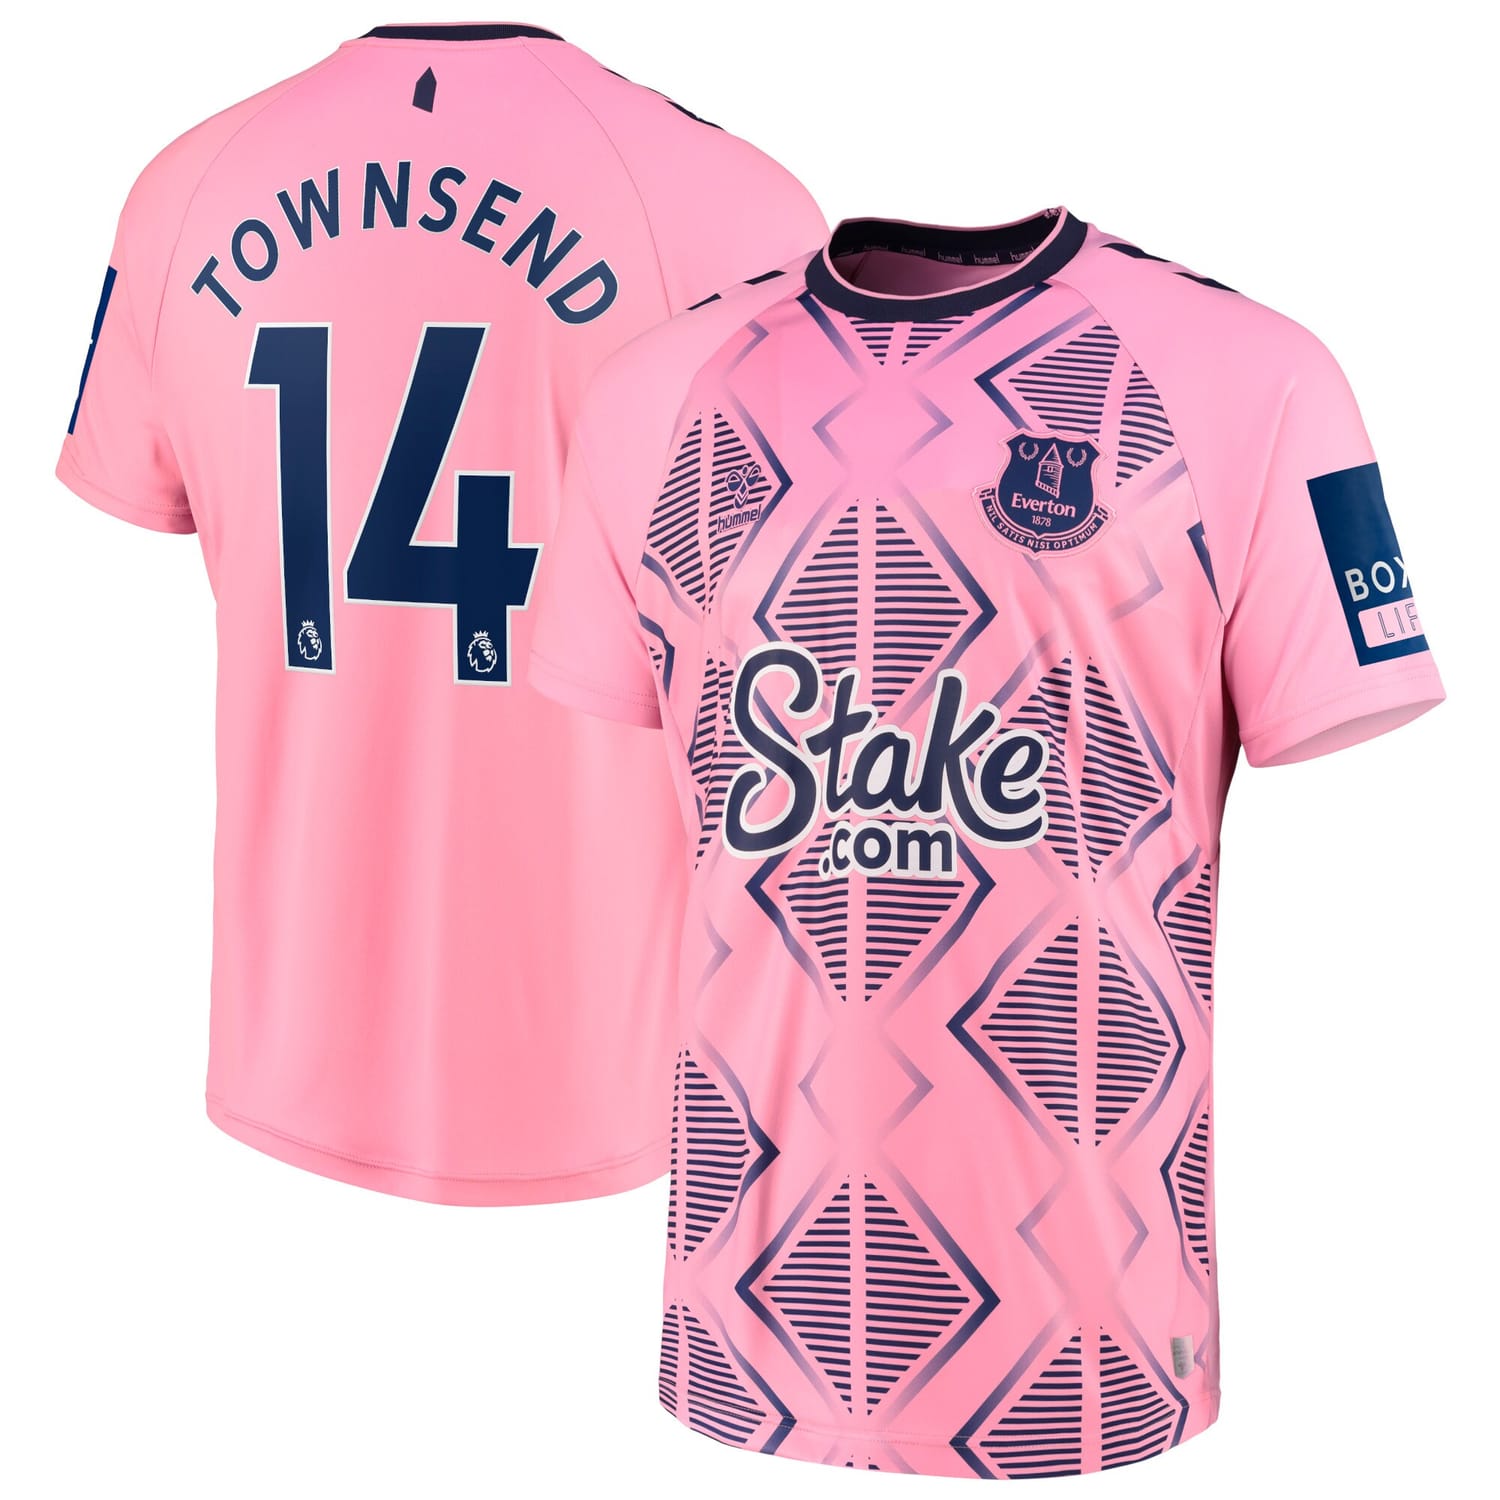 Premier League Everton Away Jersey Shirt 2022-23 player Andros Townsend 14 printing for Men